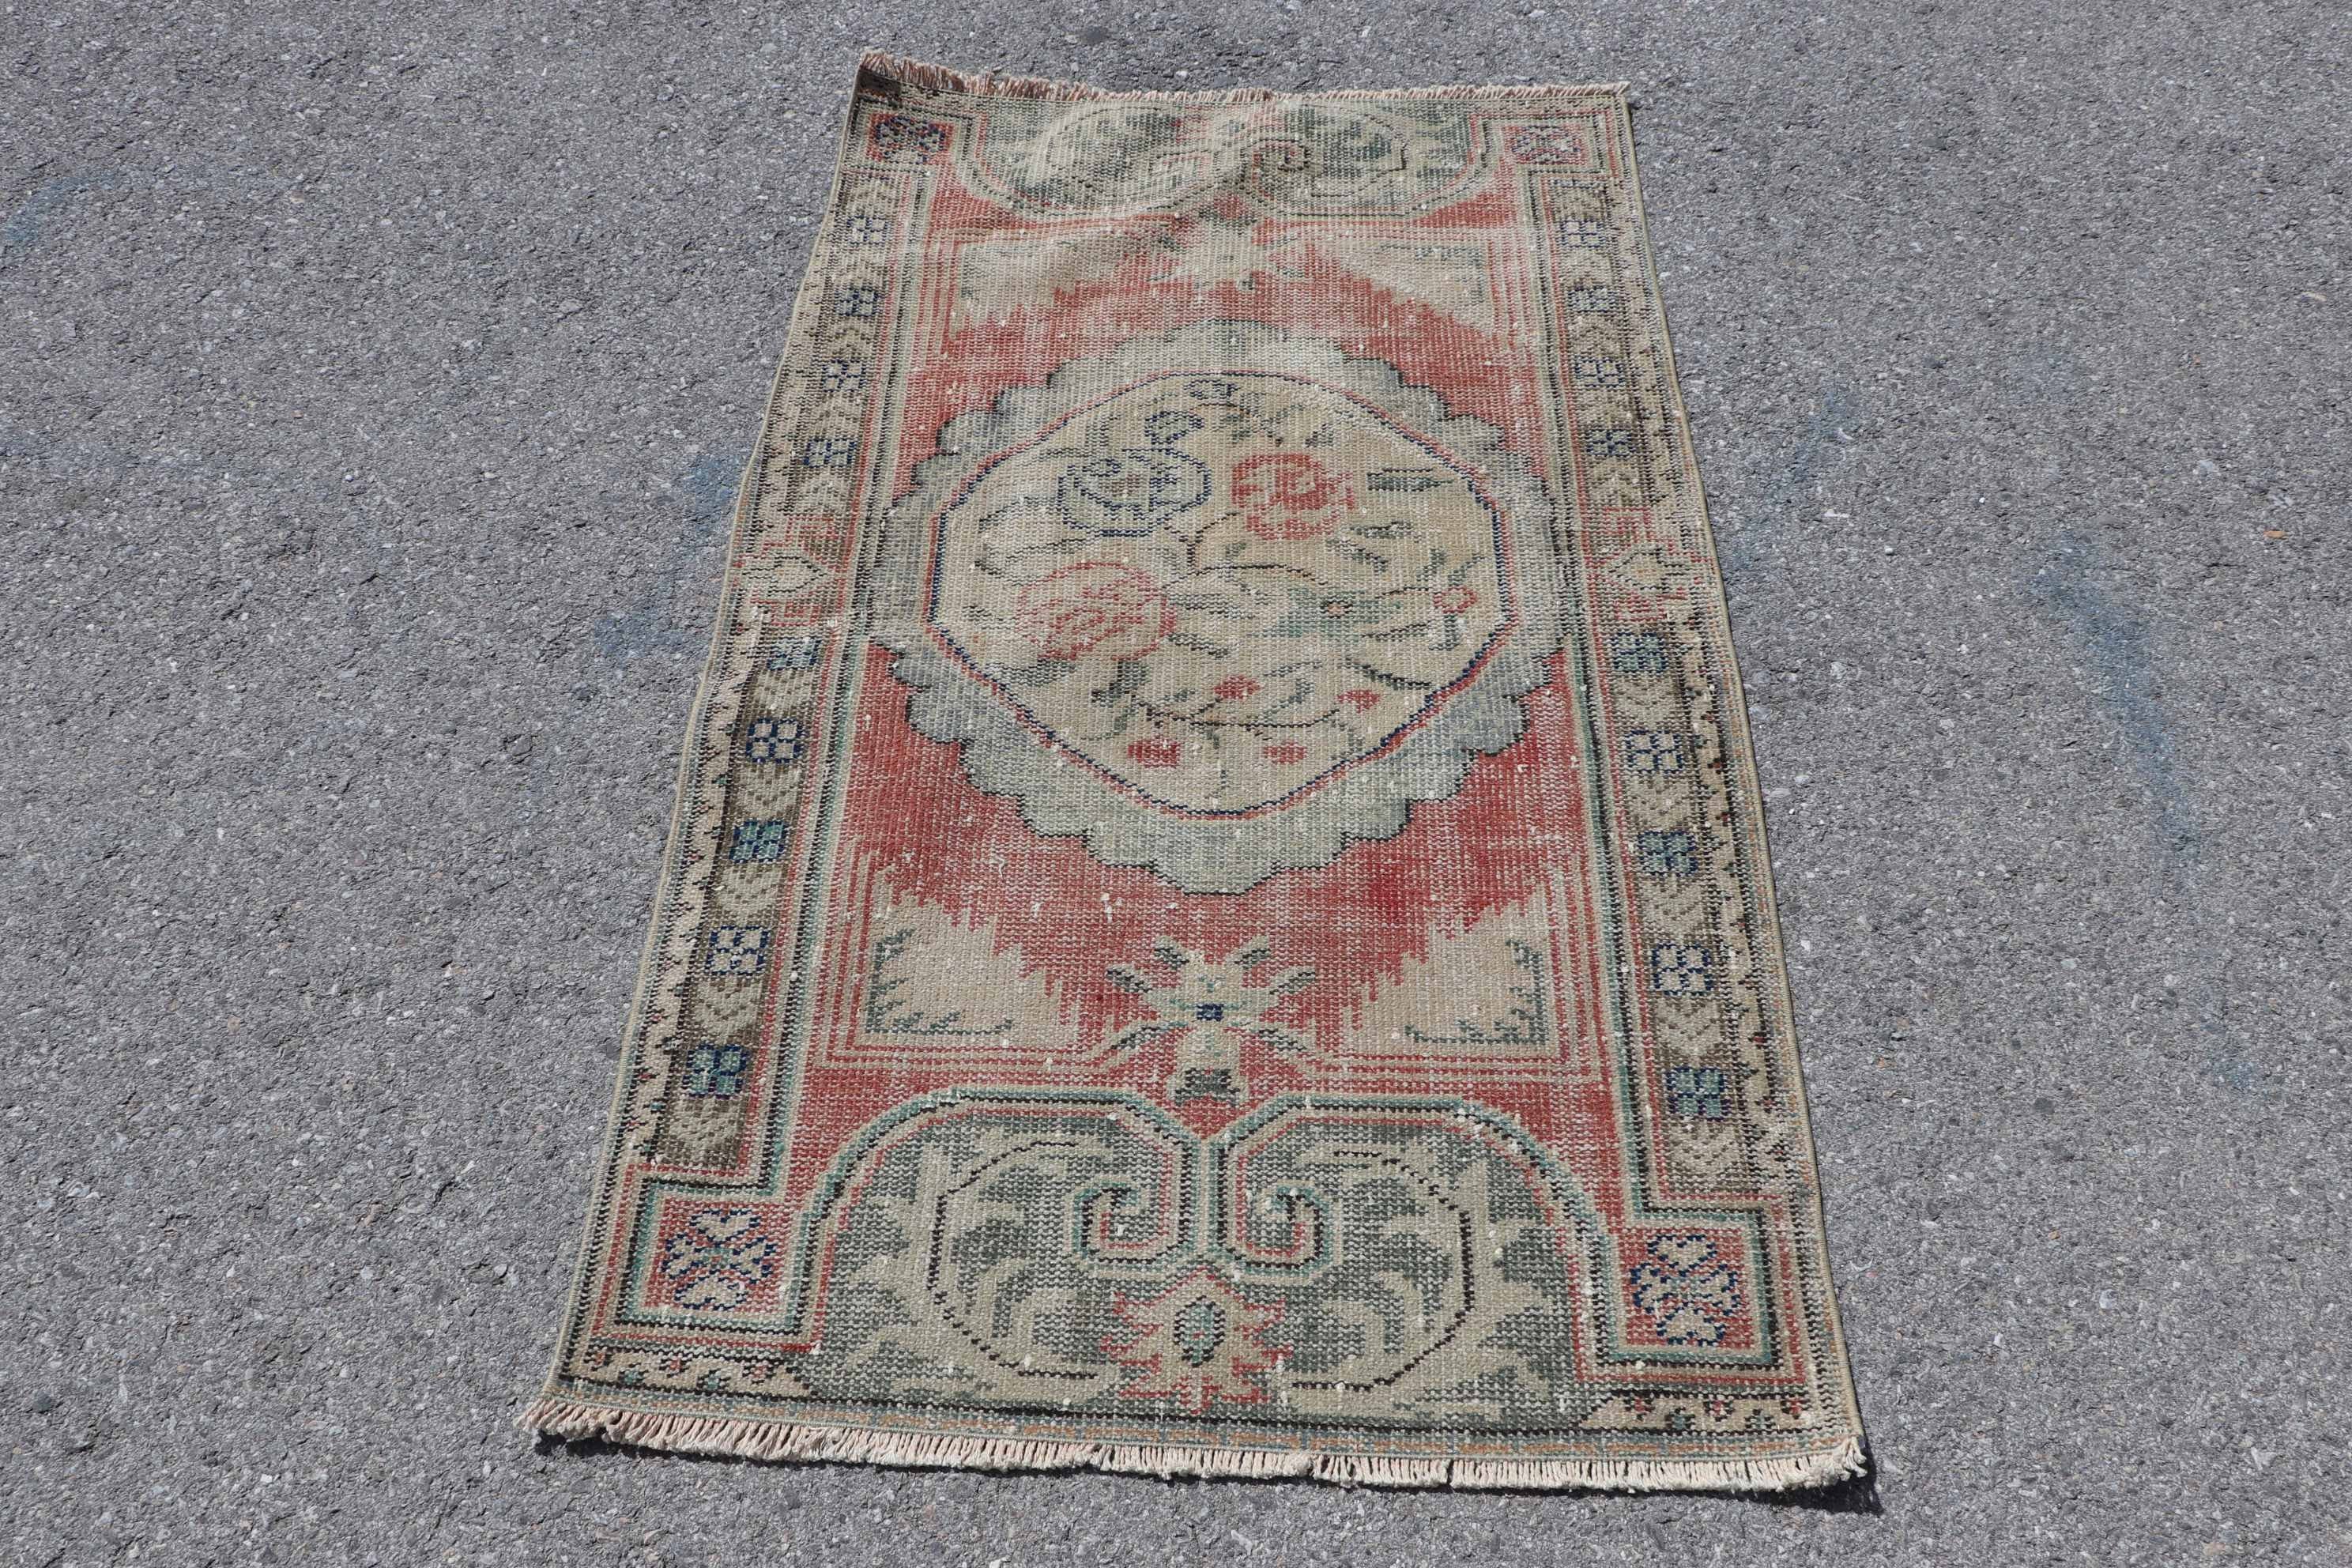 Rugs for Bedroom, Oushak Rug, Vintage Rug, Home Decor Rug, Bedroom Rug, Turkish Rugs, 2.9x4.8 ft Small Rug, Red Cool Rug, Entry Rugs